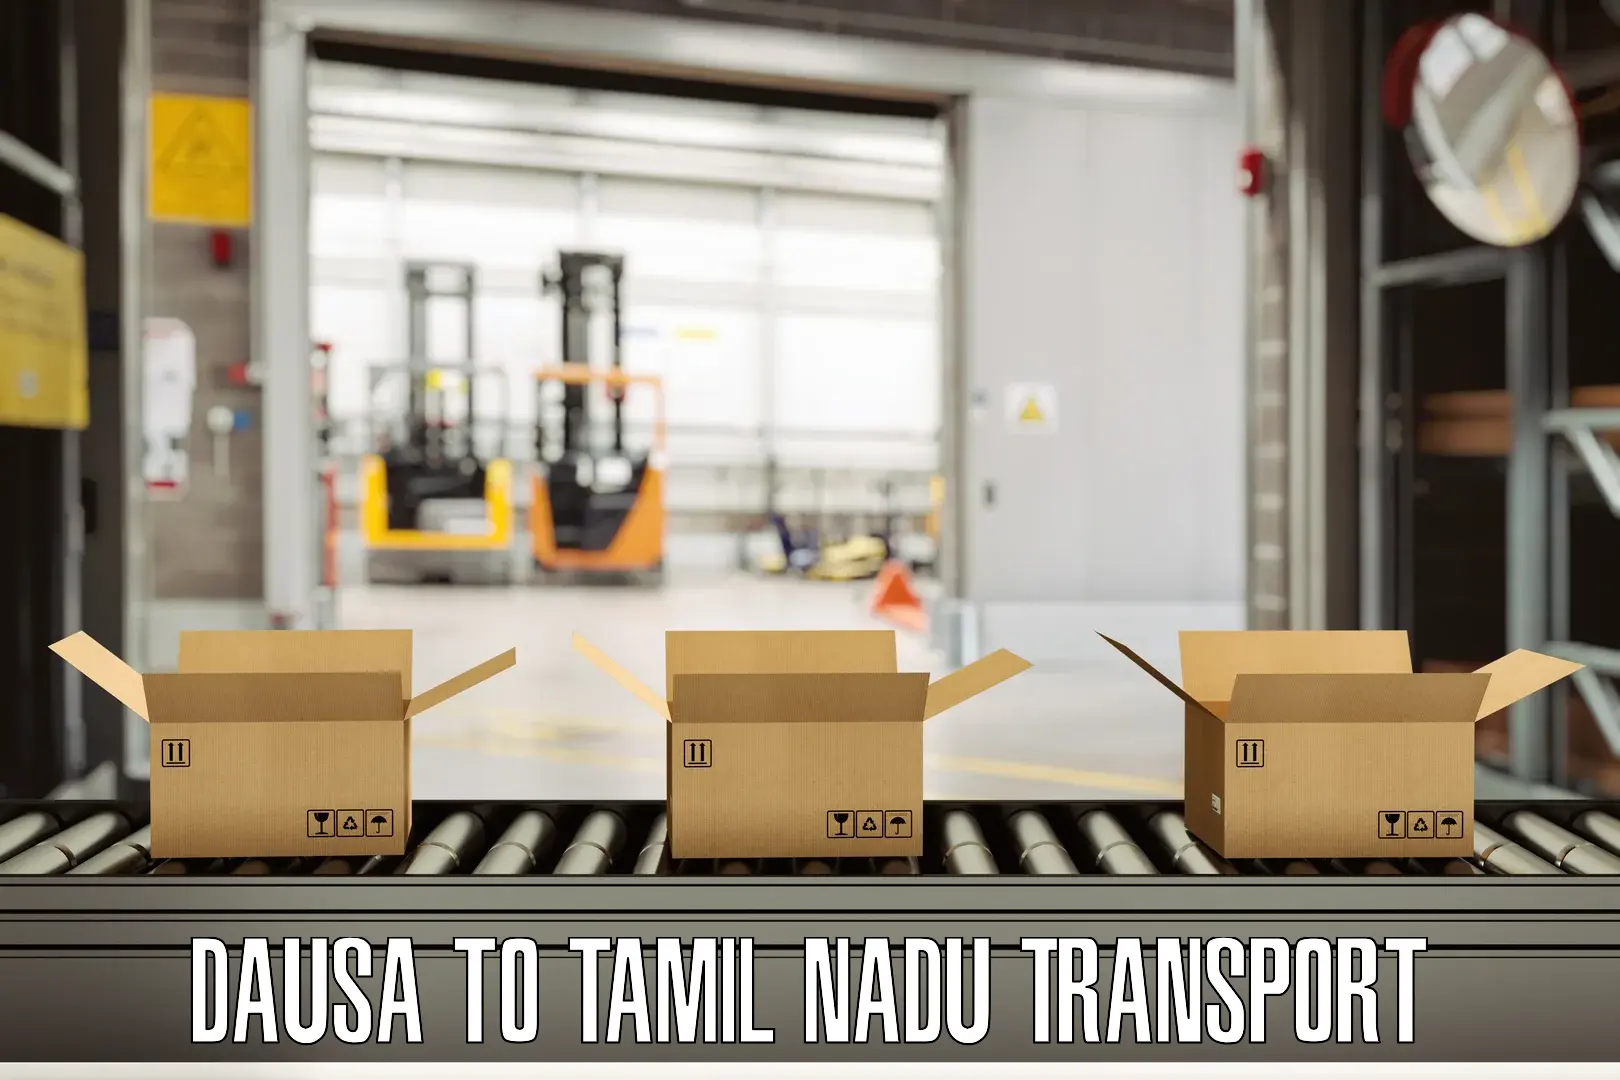 Commercial transport service Dausa to Thisayanvilai